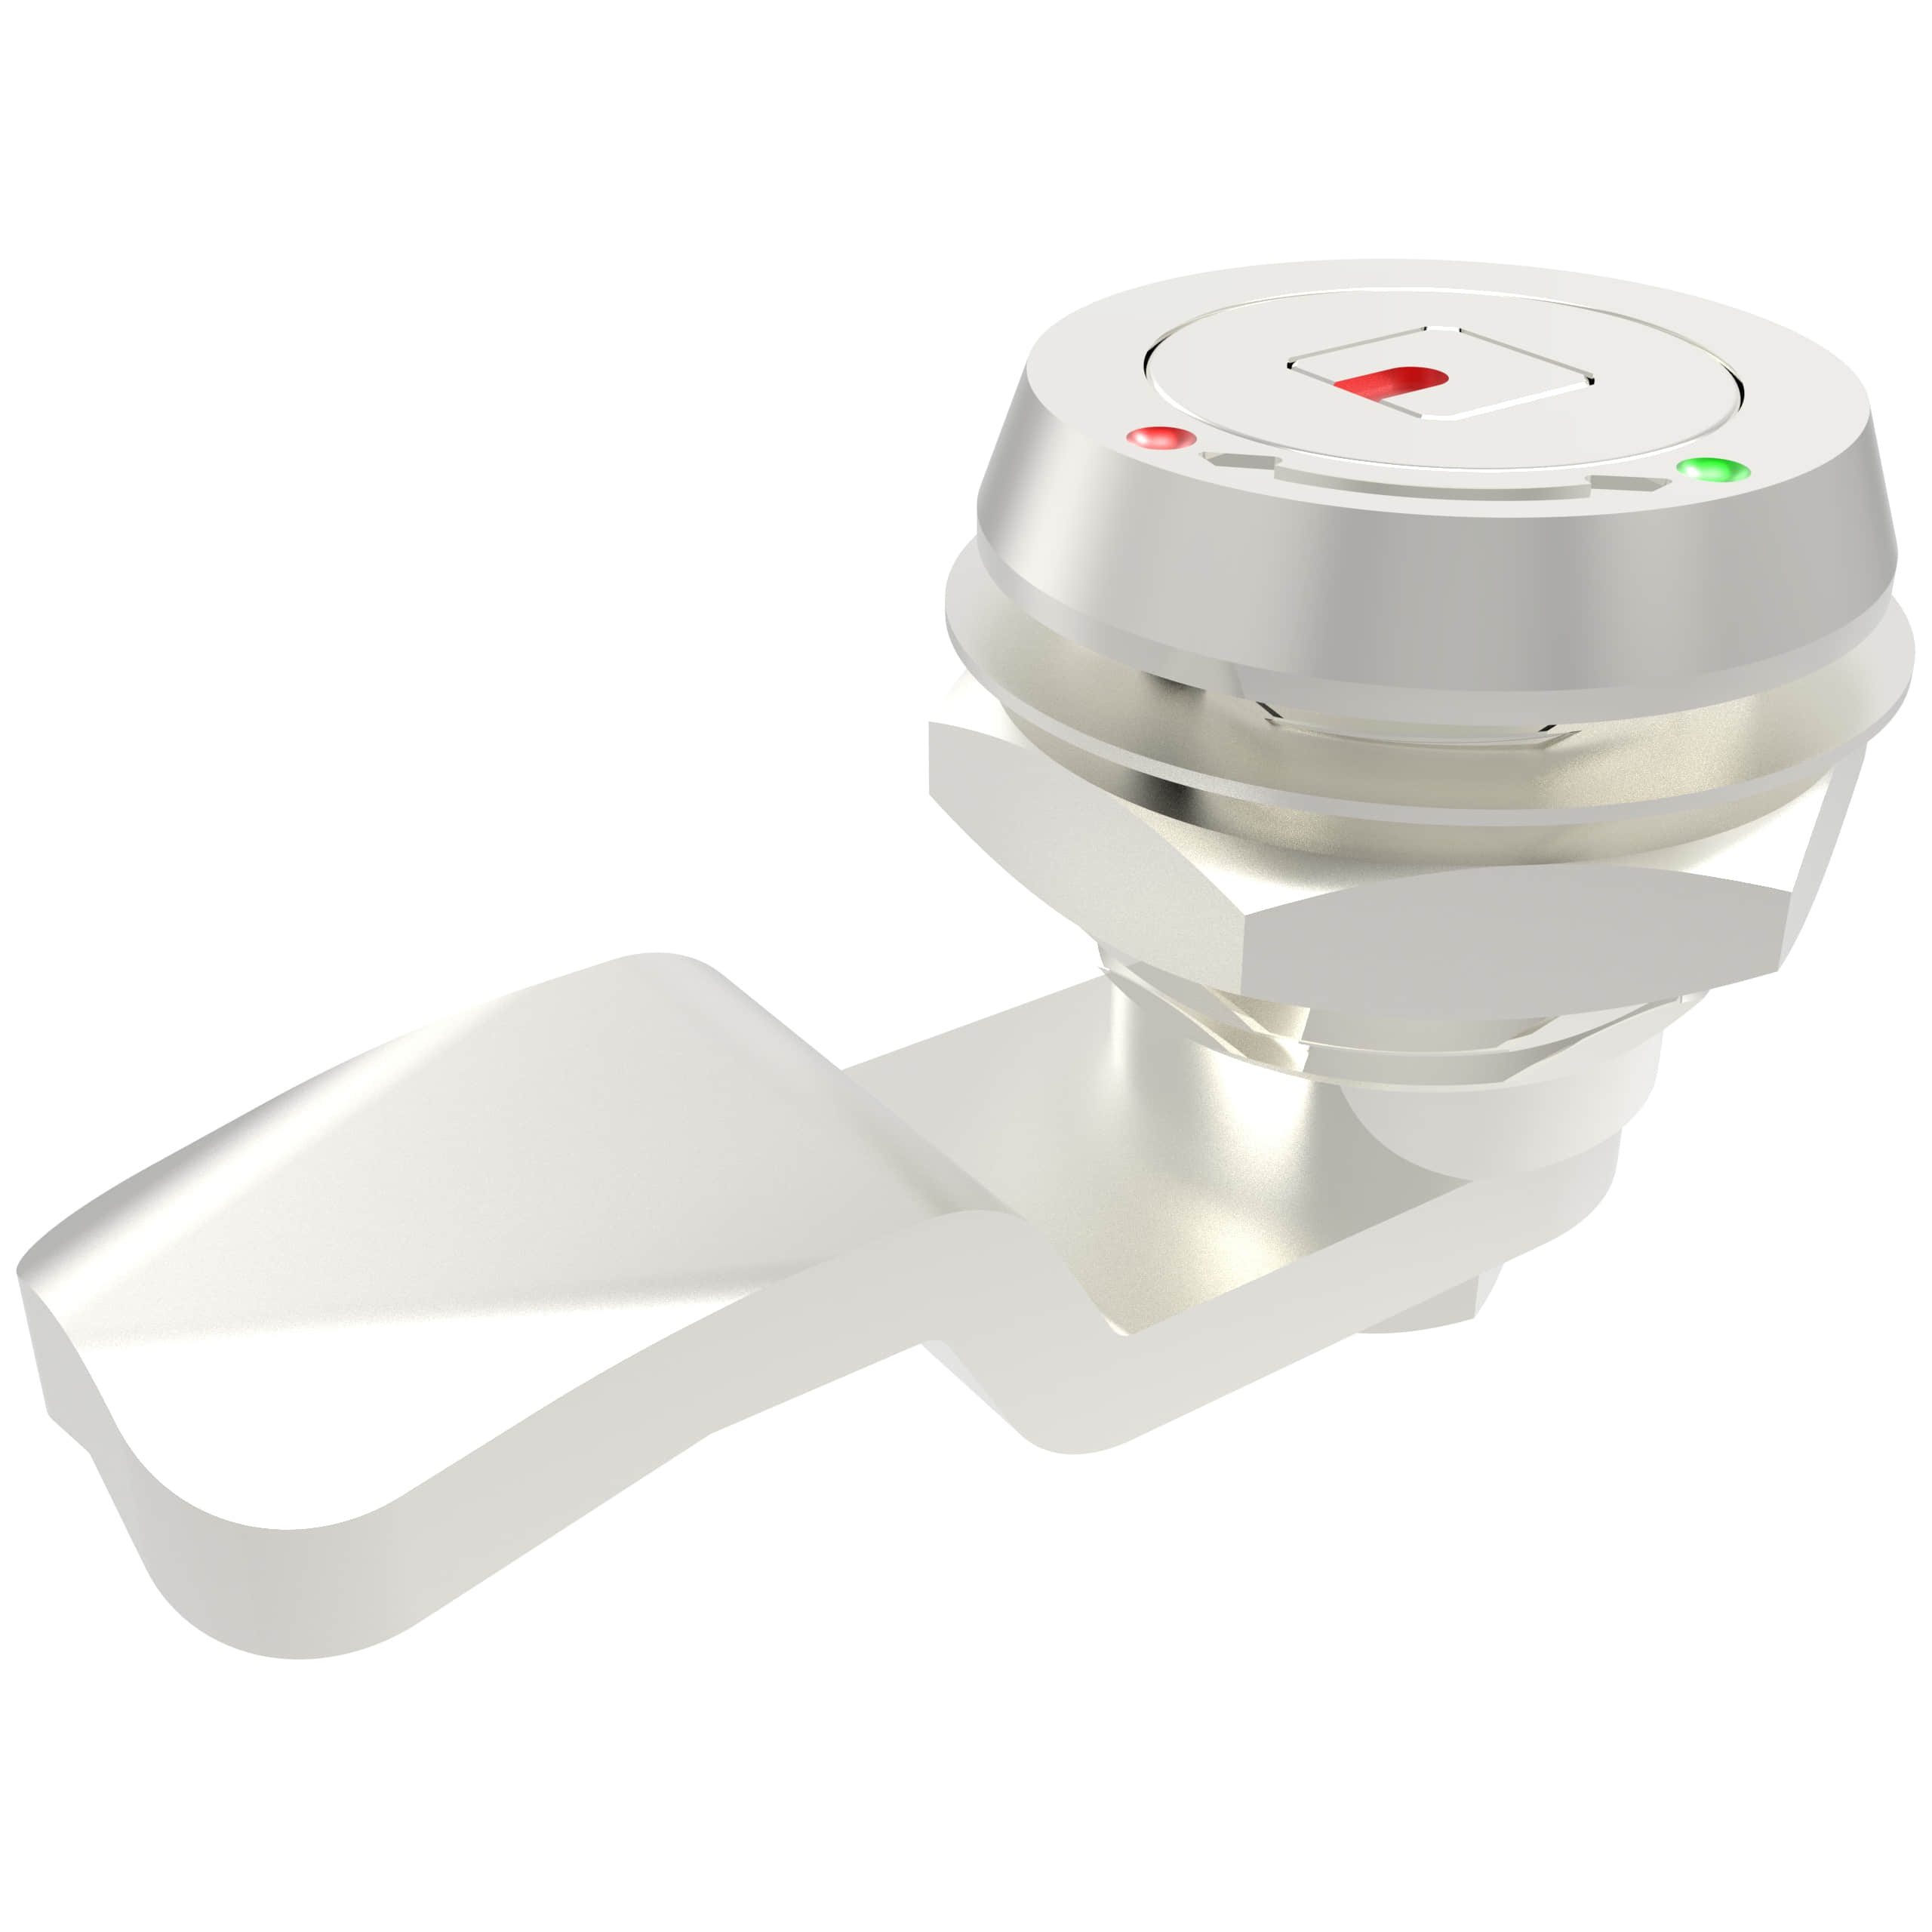 D4-1447-247 | Quarter turn cam Latch,Safety Lock, 7mm square Core with Red and Green Dots, Stainless Steel, Passivated
